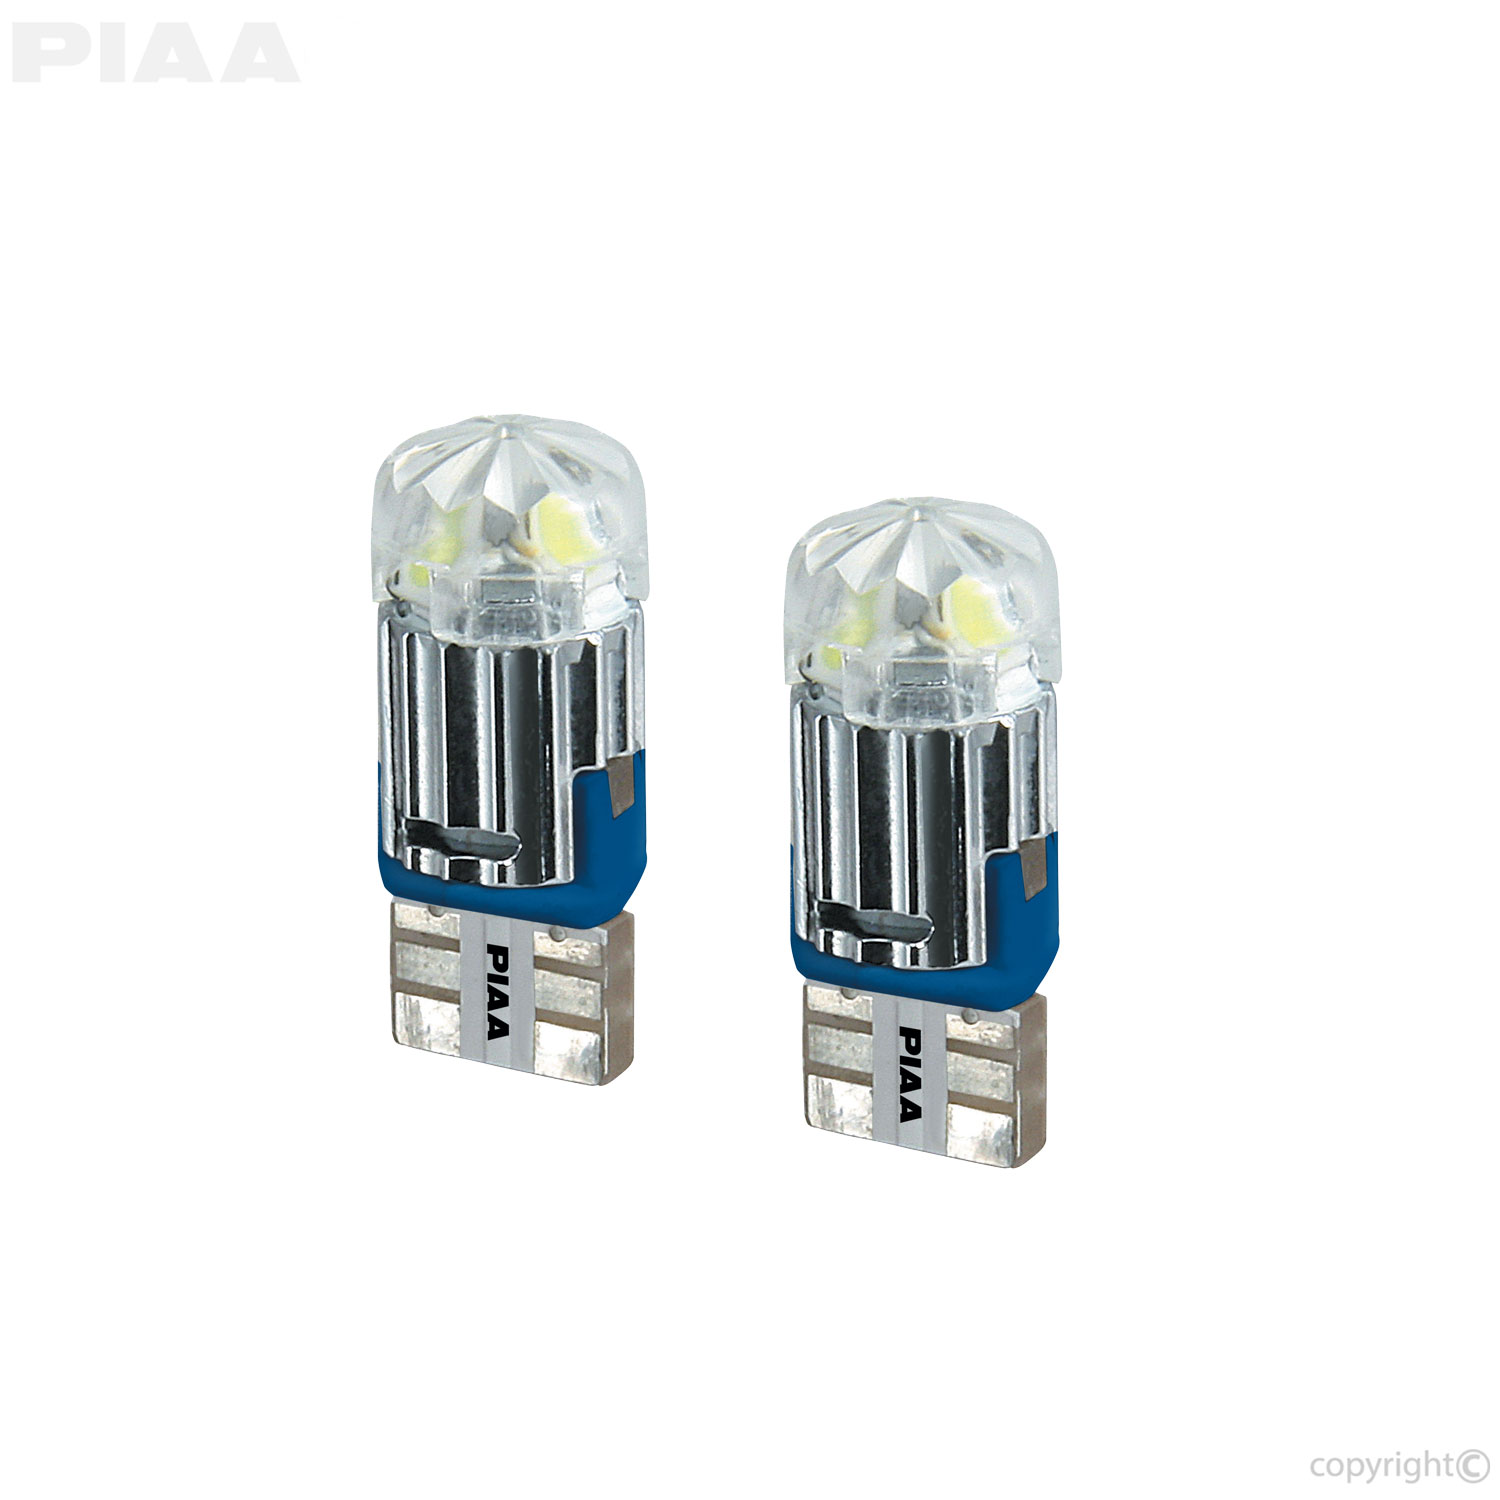 https://www.piaa.com/resize/Shared/product-images/automotive-bulbs/piaa-19520-t10-led-dual-hr.jpg?bw=1000&w=1000&bh=1000&h=1000